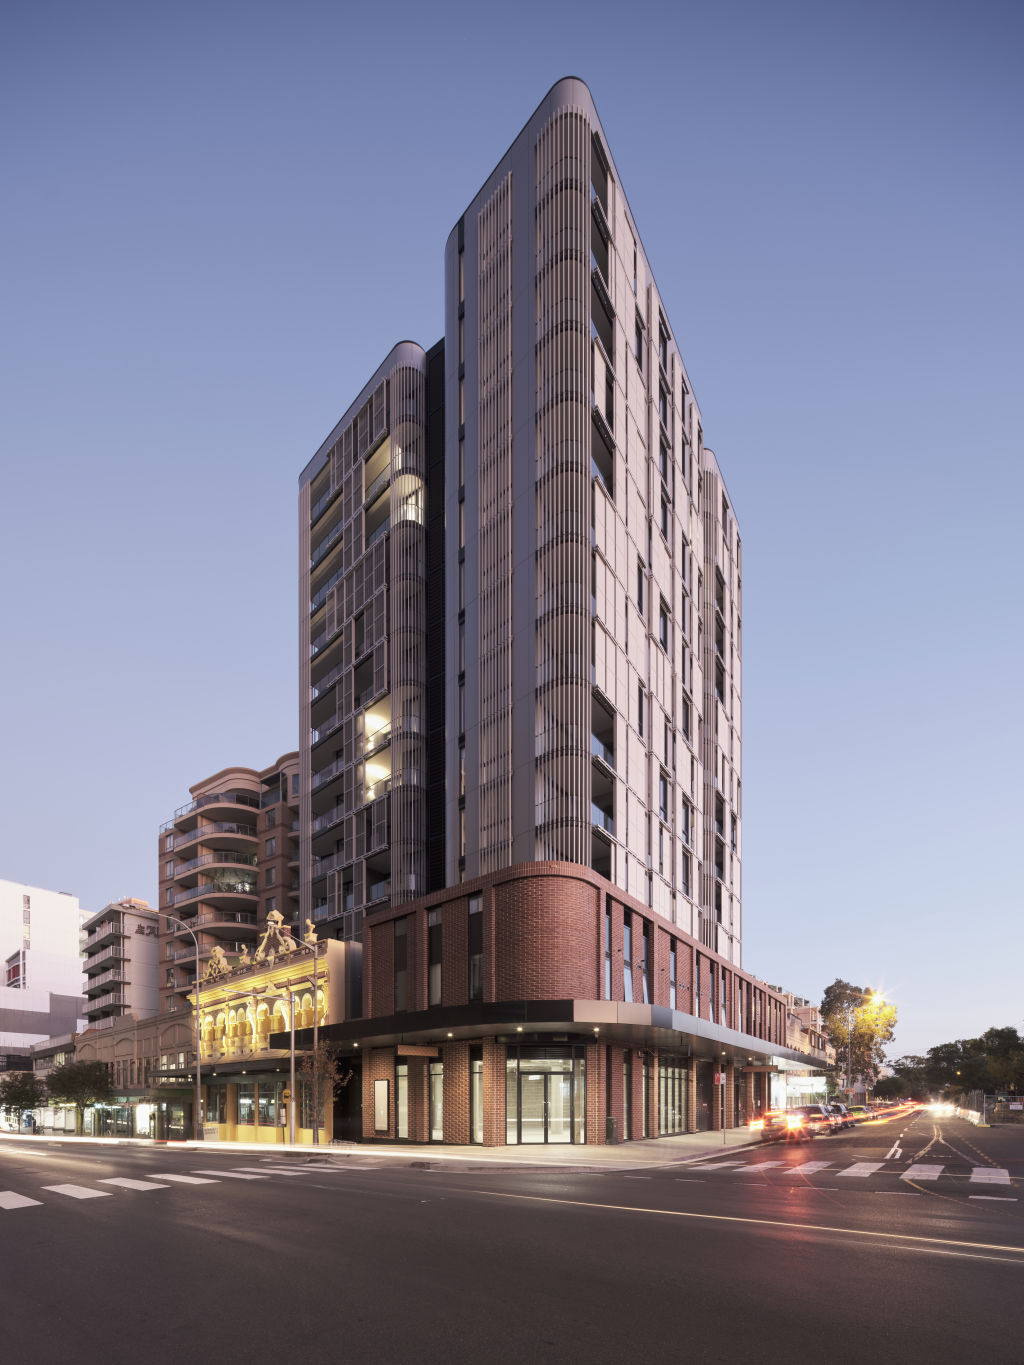 Residents of the 14-storey development will have access to a rooftop garden. Photo: TWT Property Group